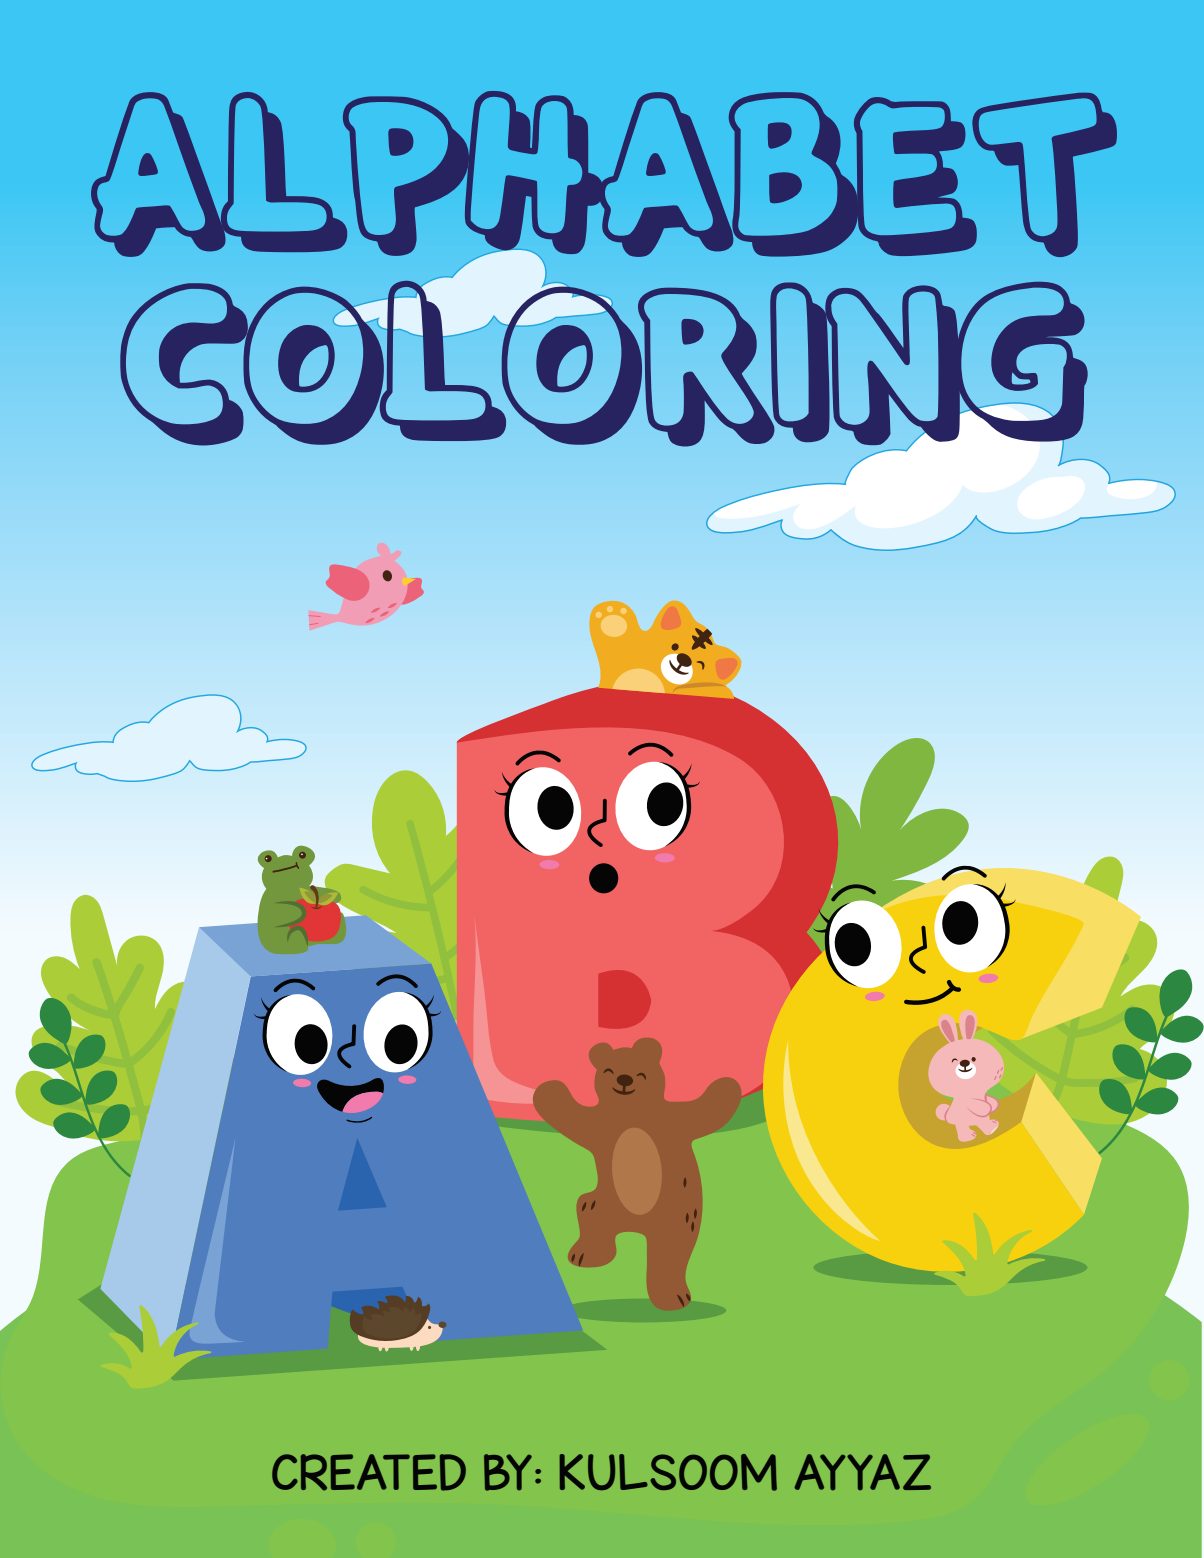 Rich Results on Google's SERP when searching for '2. Alphabet Coloring'